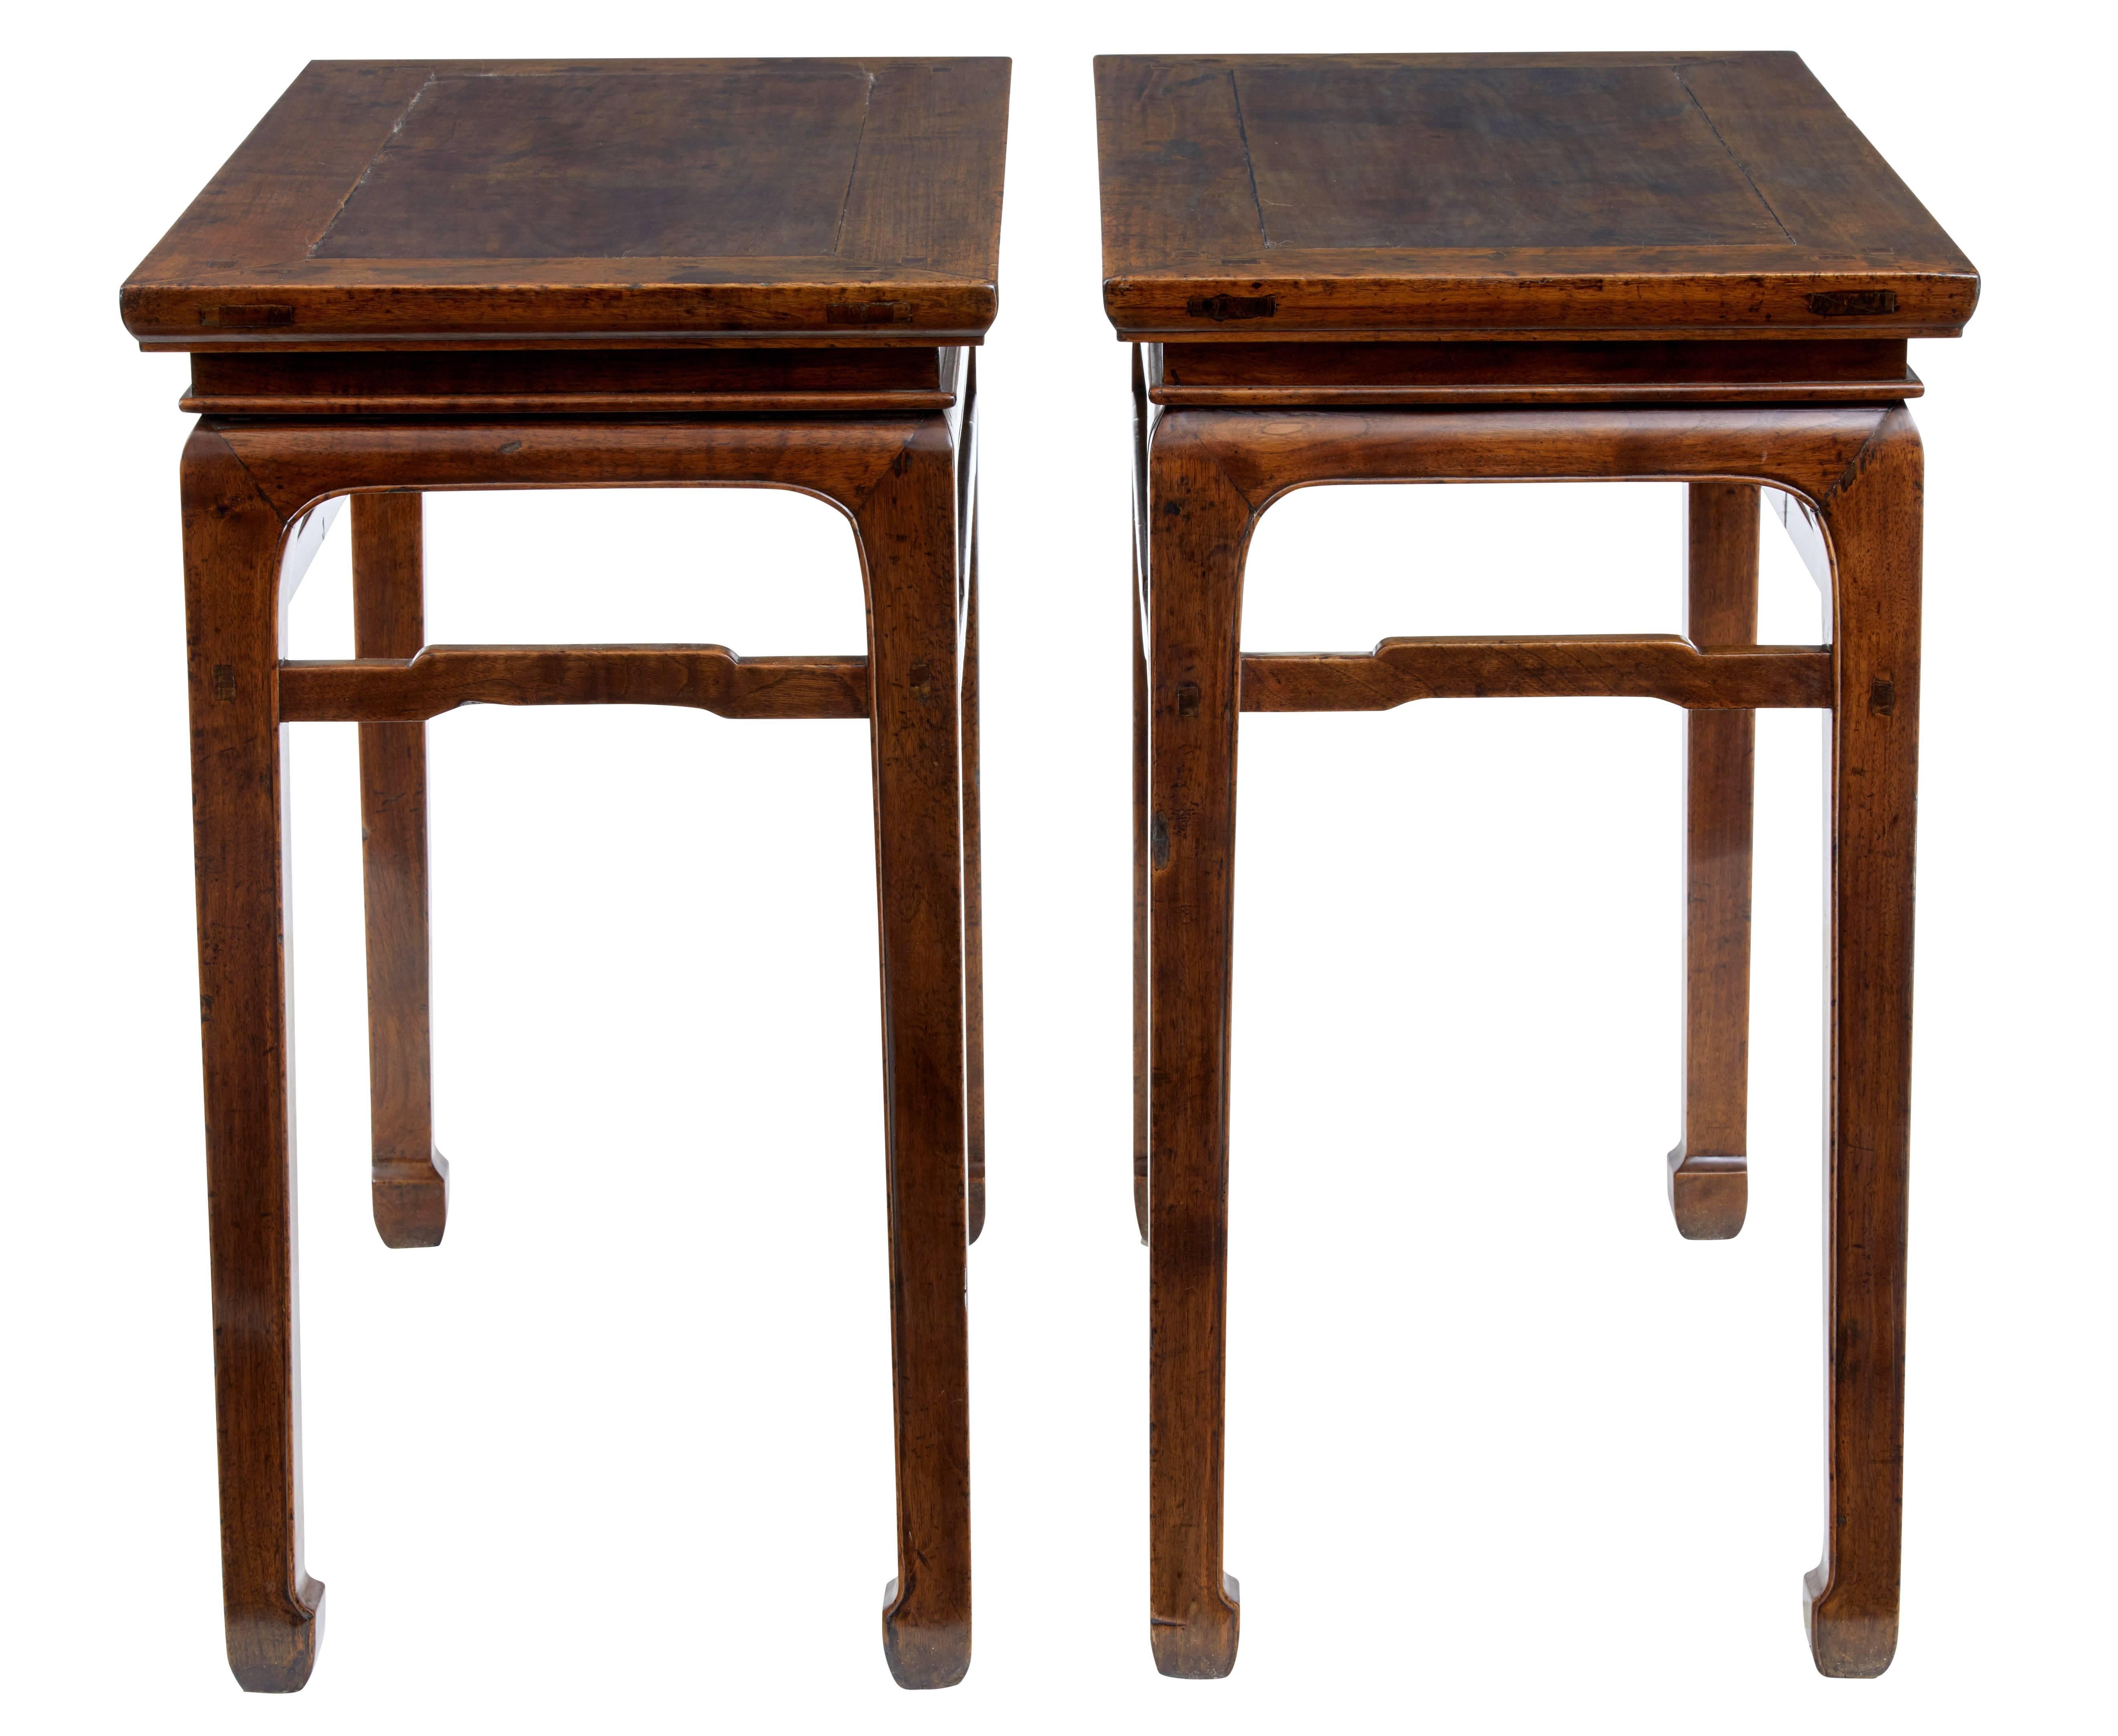 Pair of good quality Chinese hardwood console tables, circa 1880.

Unusual to find a pair of tables of this kind, which makes these tables rare.

High lacquer finish with original patina.

Expected staining and ring marks.